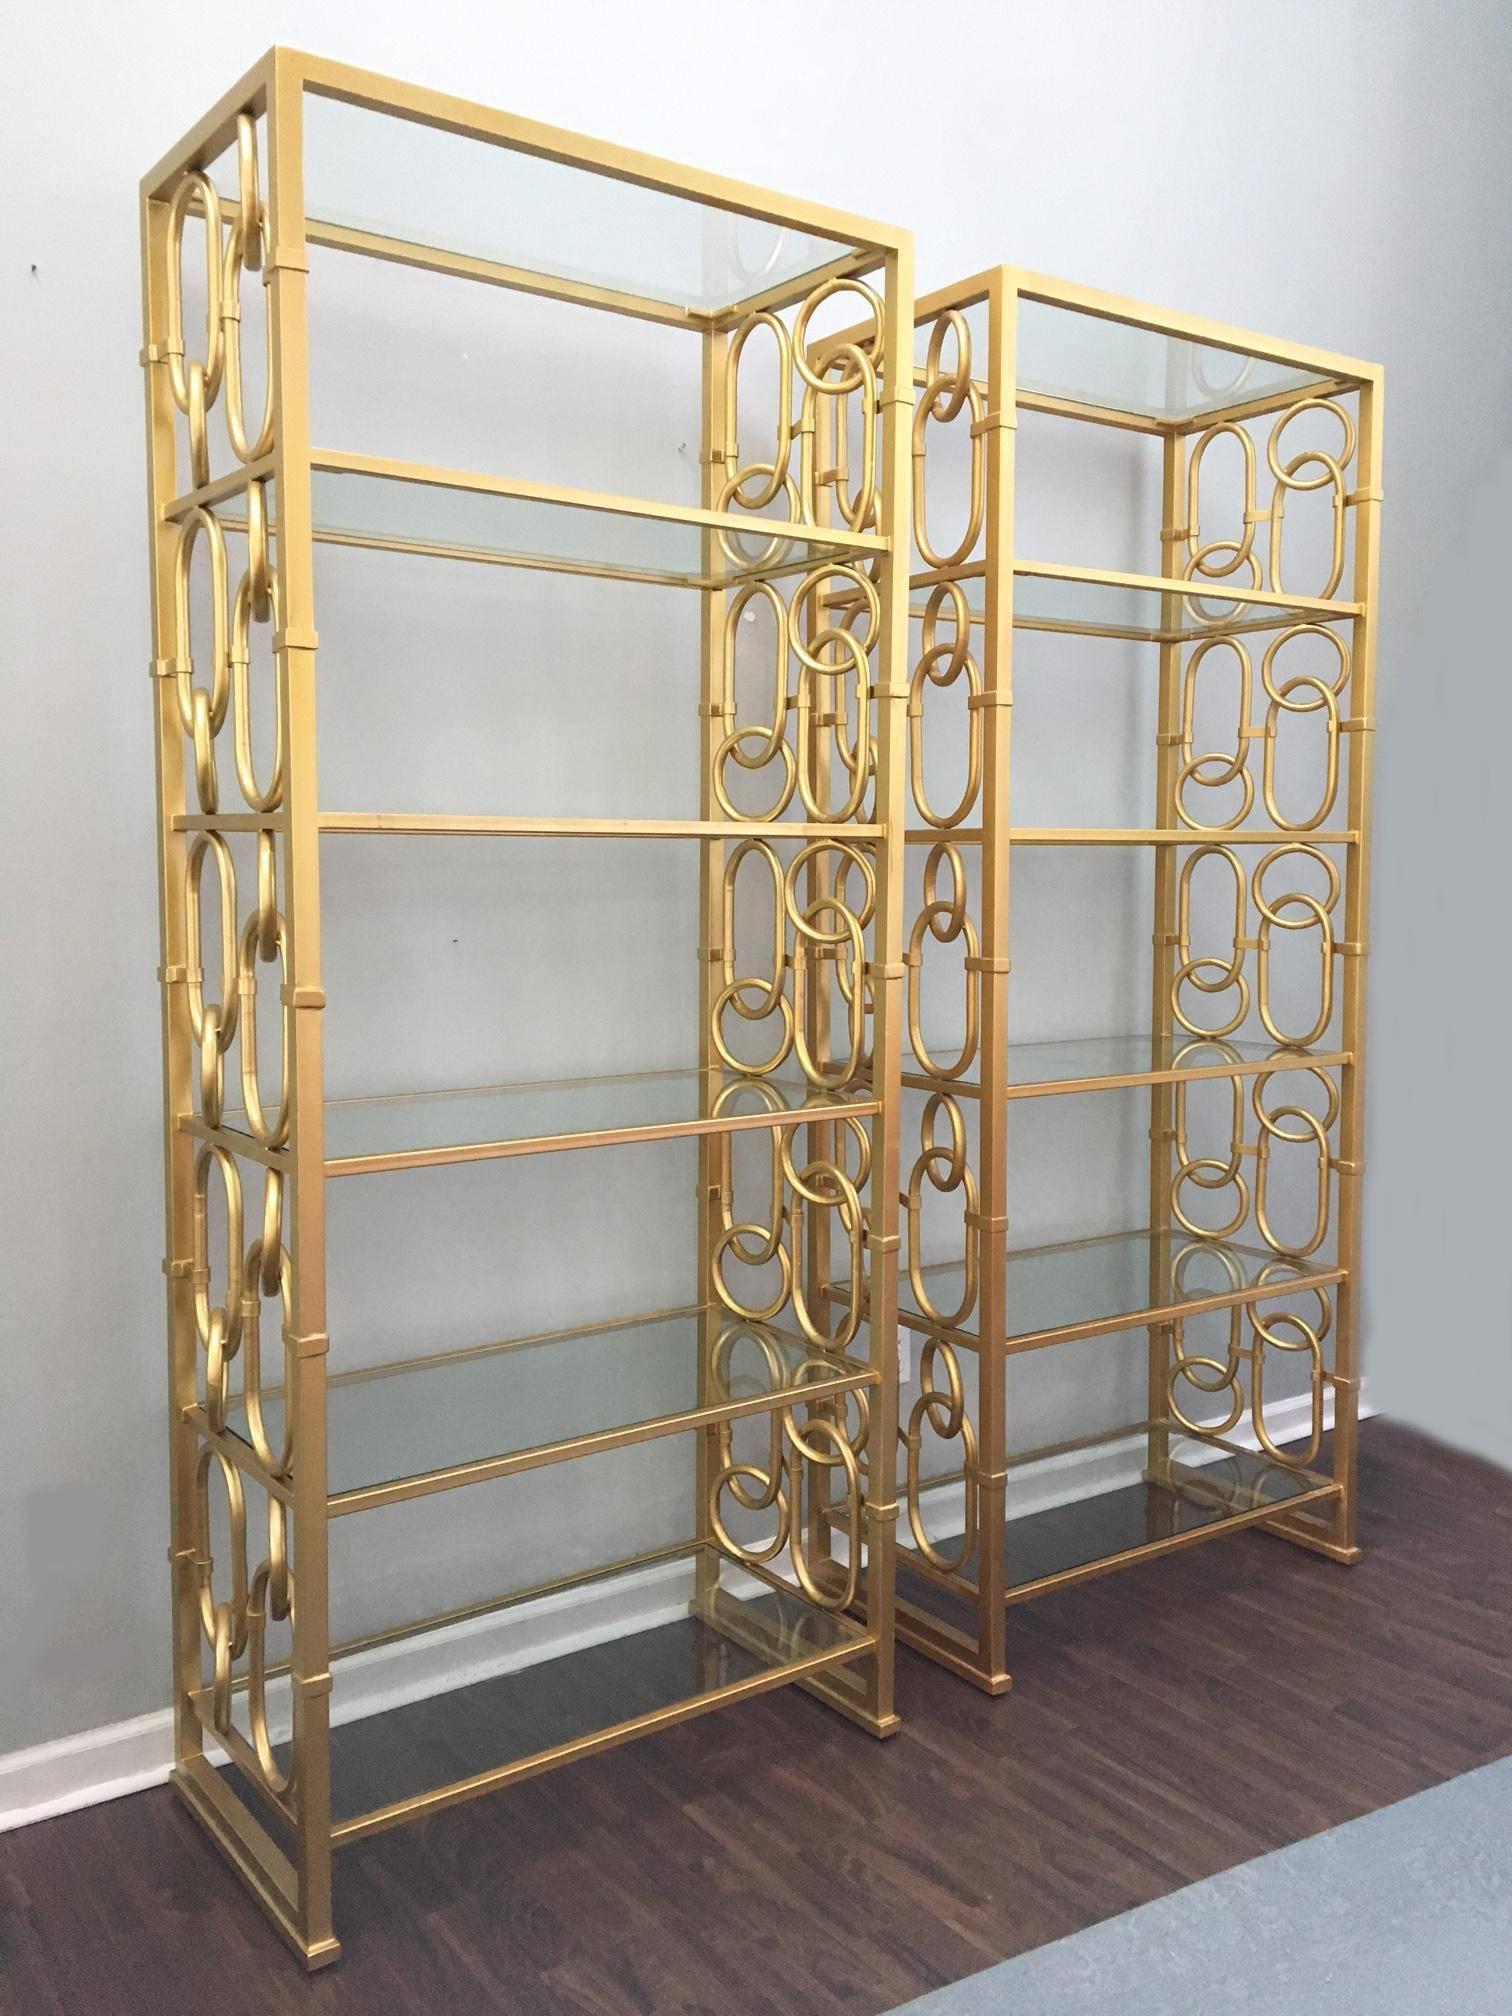 Monumental Hollywood Regency etagere pair features large gold chain link detailing and 6 glass shelves each. In pristine condition. Each stands over 7 feet tall.